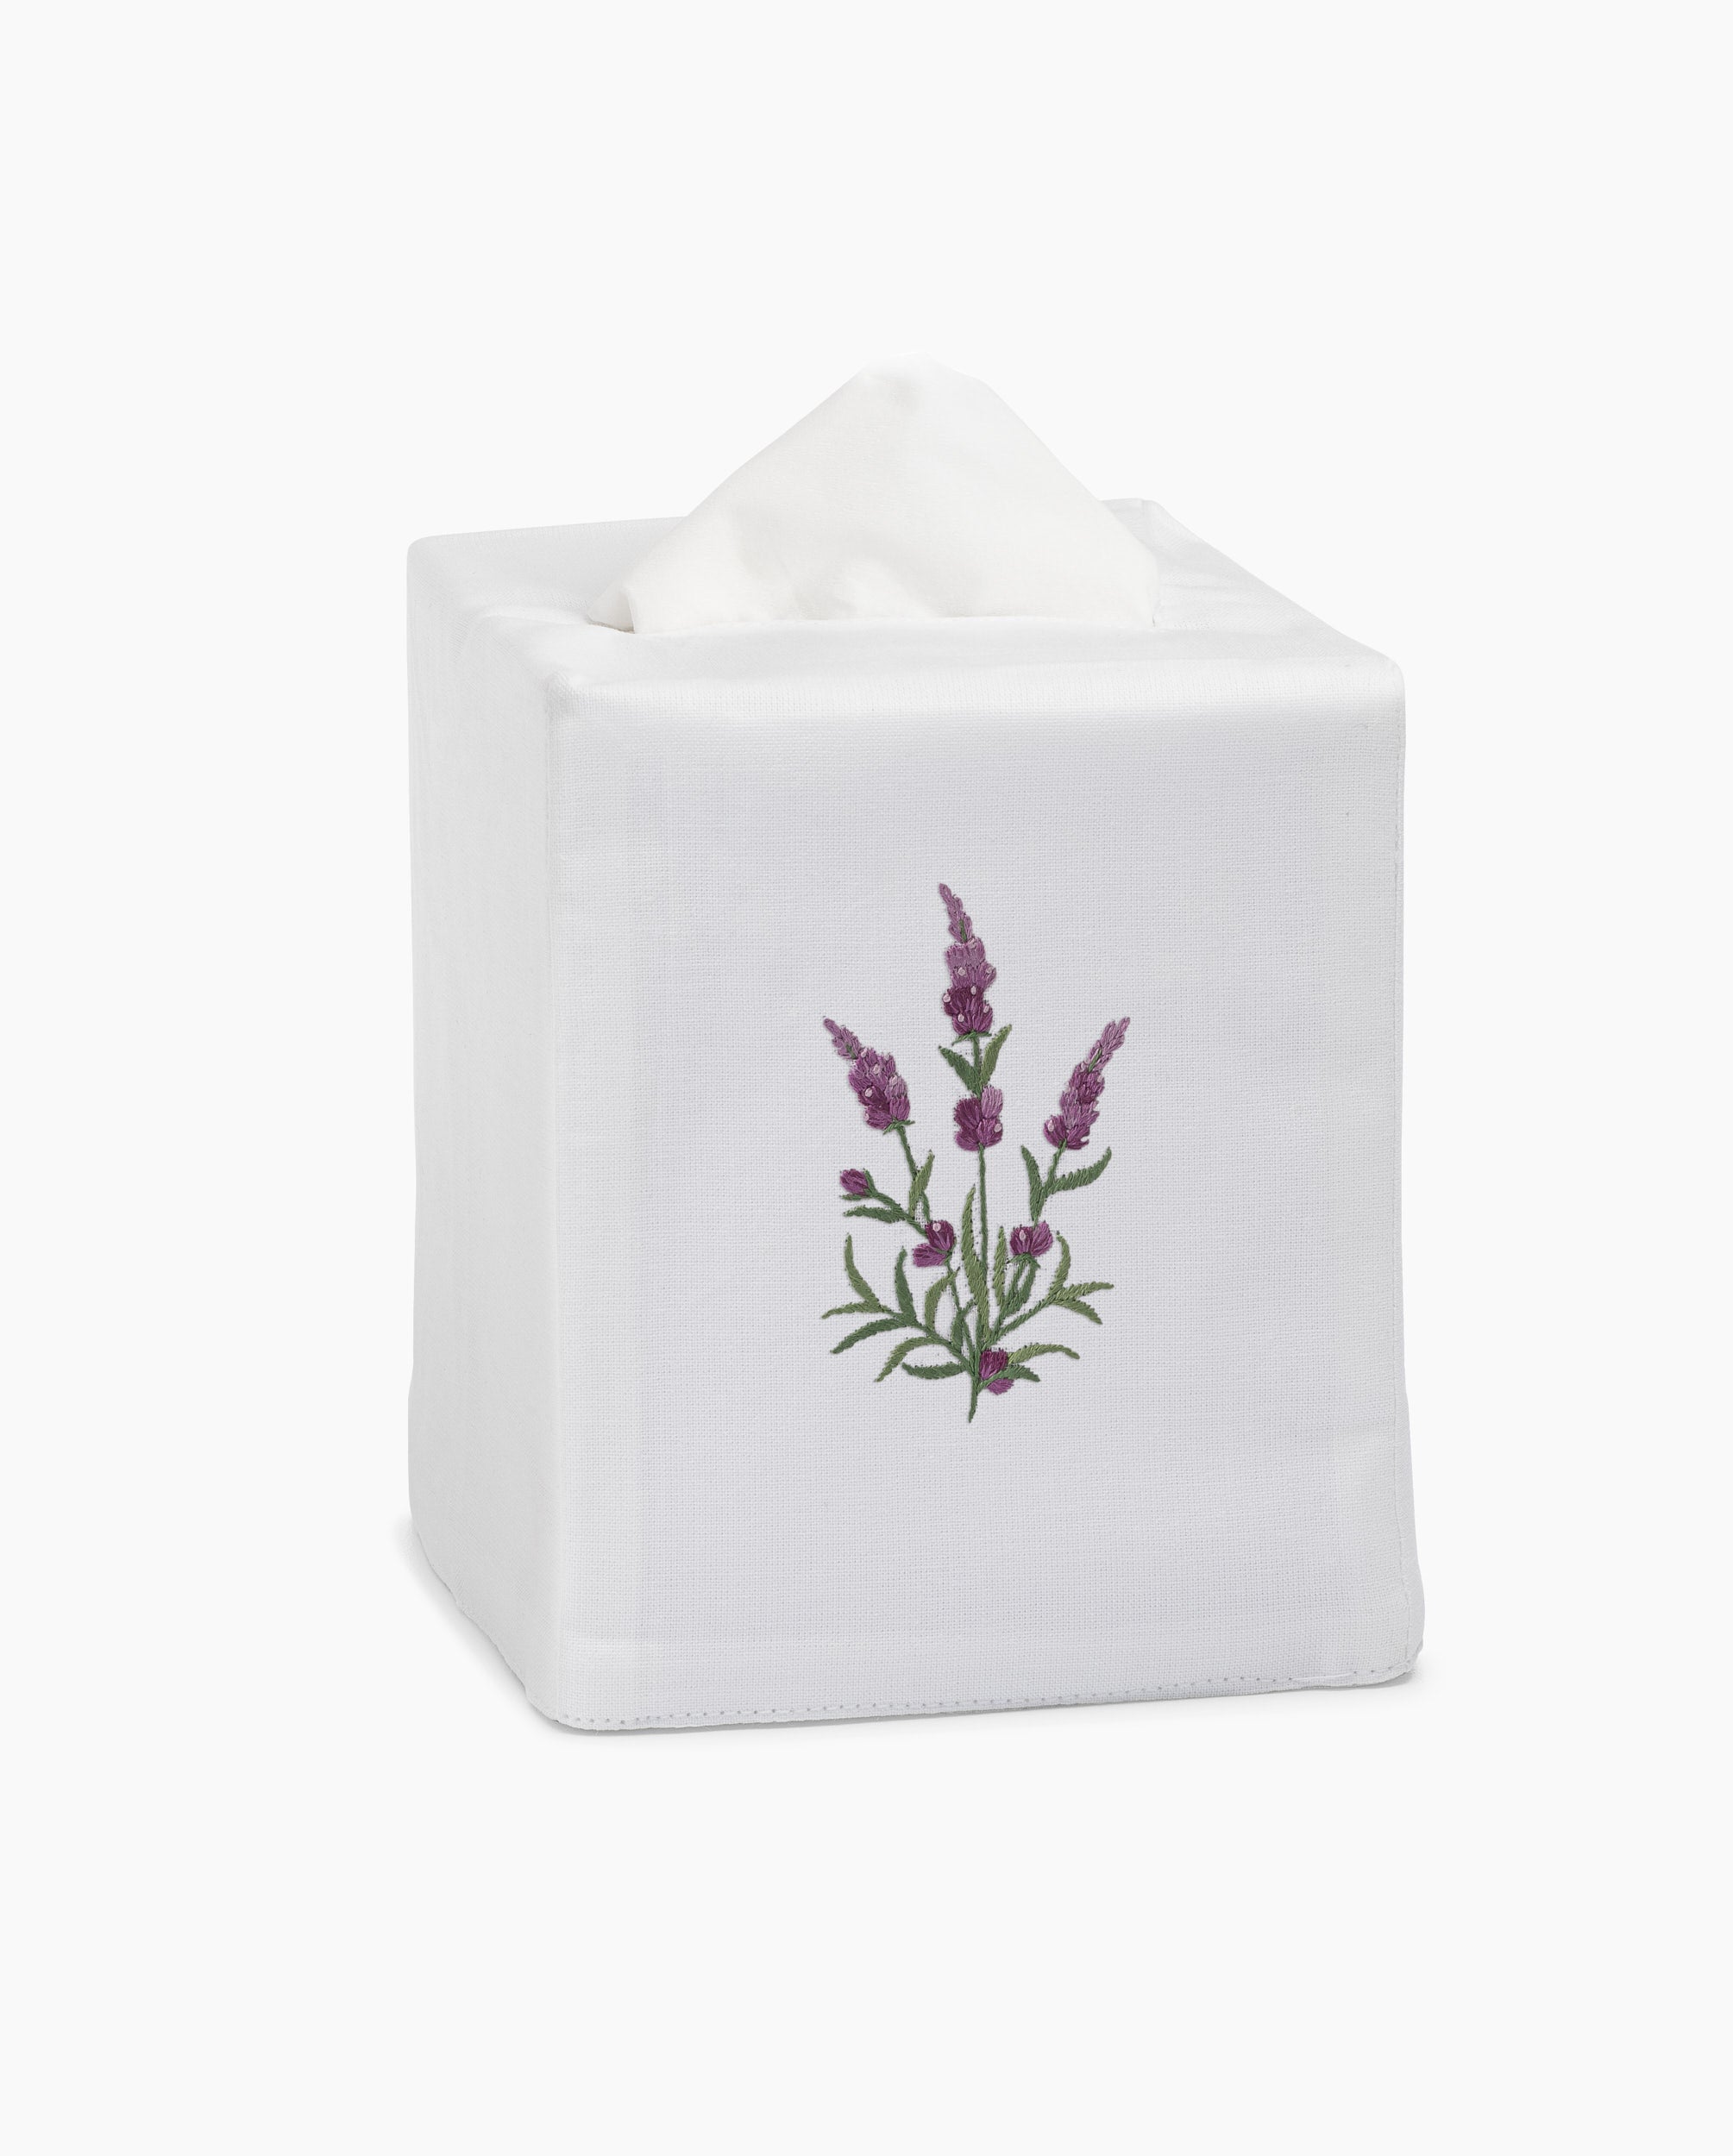 Lily of the Valley Botanical Tissue Box Cover – Henry Handwork